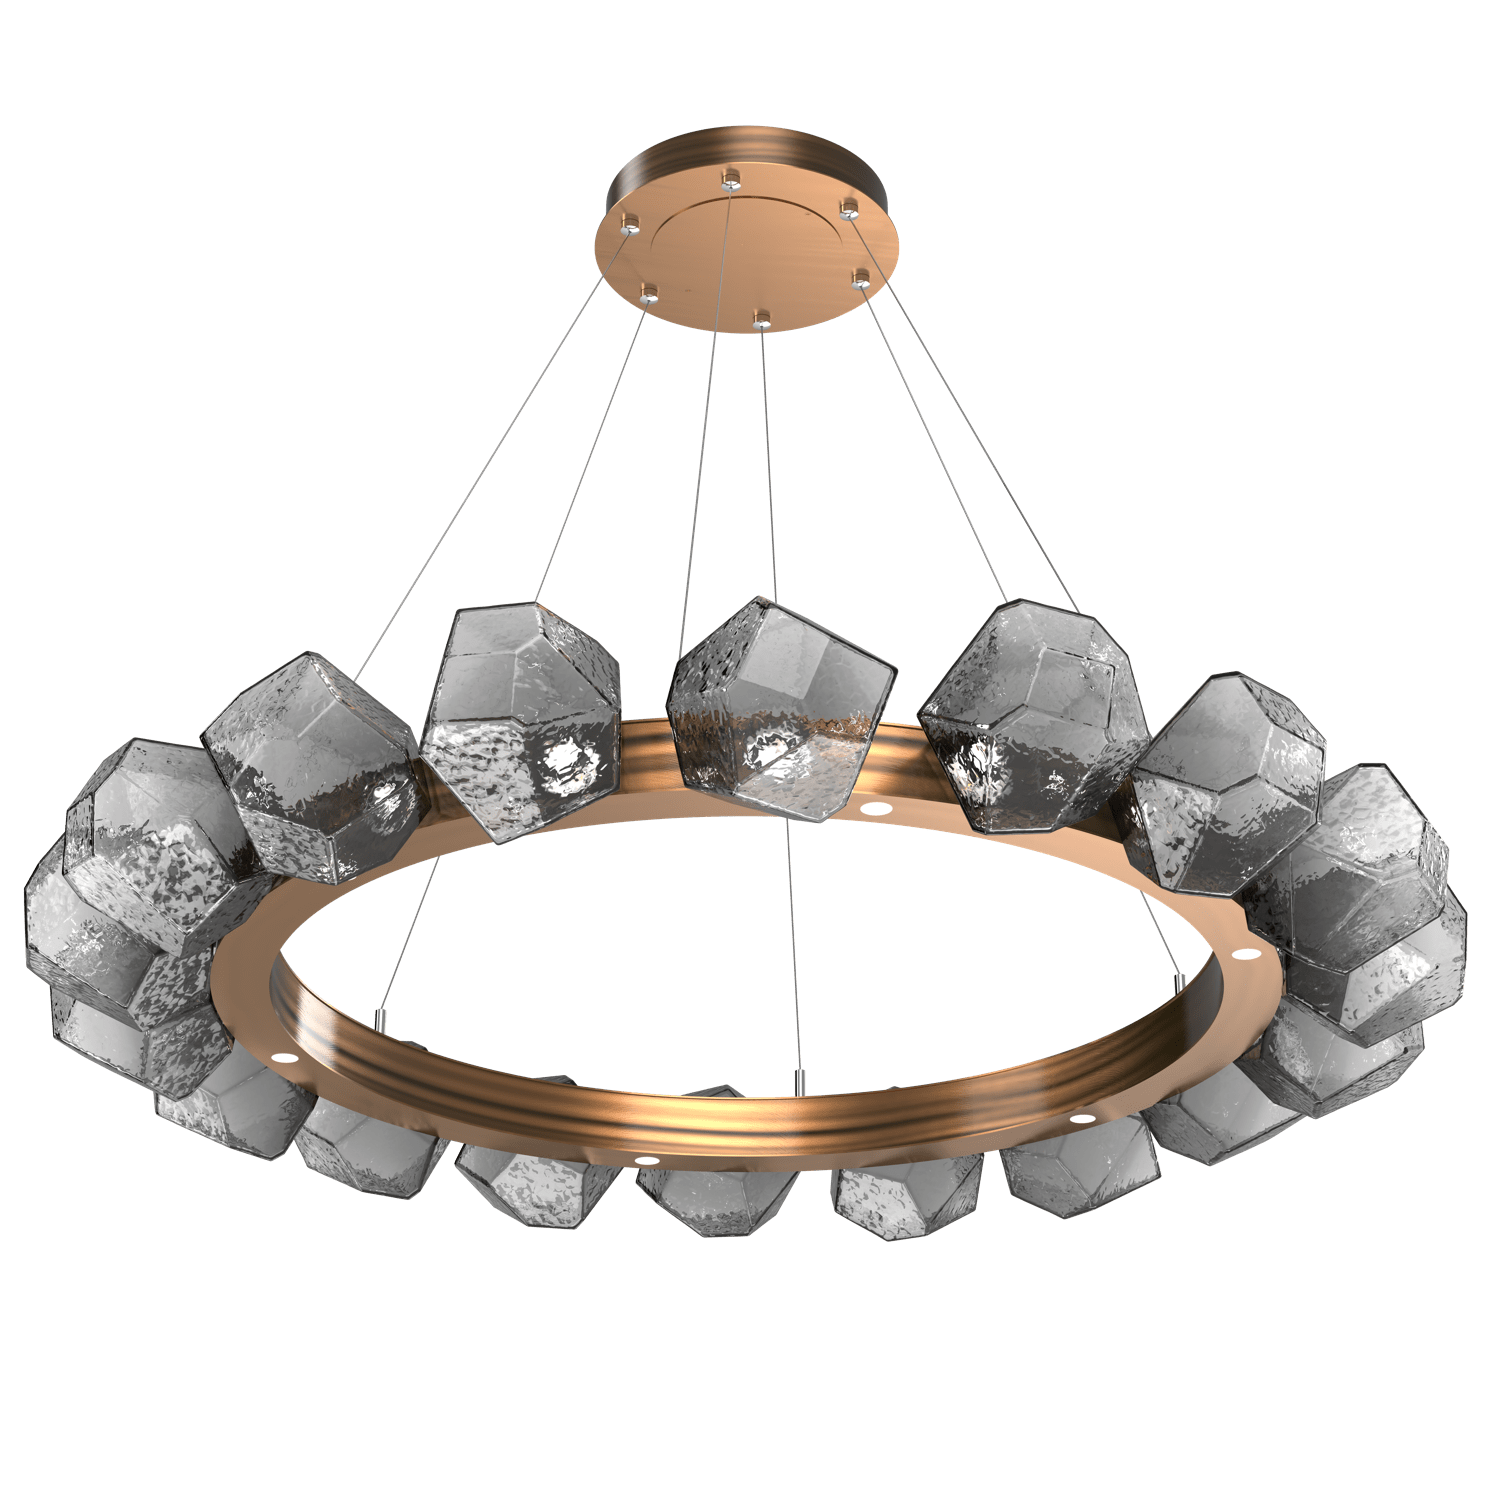 CHB0039-48-RB-S-Hammerton-Studio-Gem-48-inch-radial-ring-chandelier-with-oil-rubbed-bronze-finish-and-smoke-blown-glass-shades-and-LED-lamping